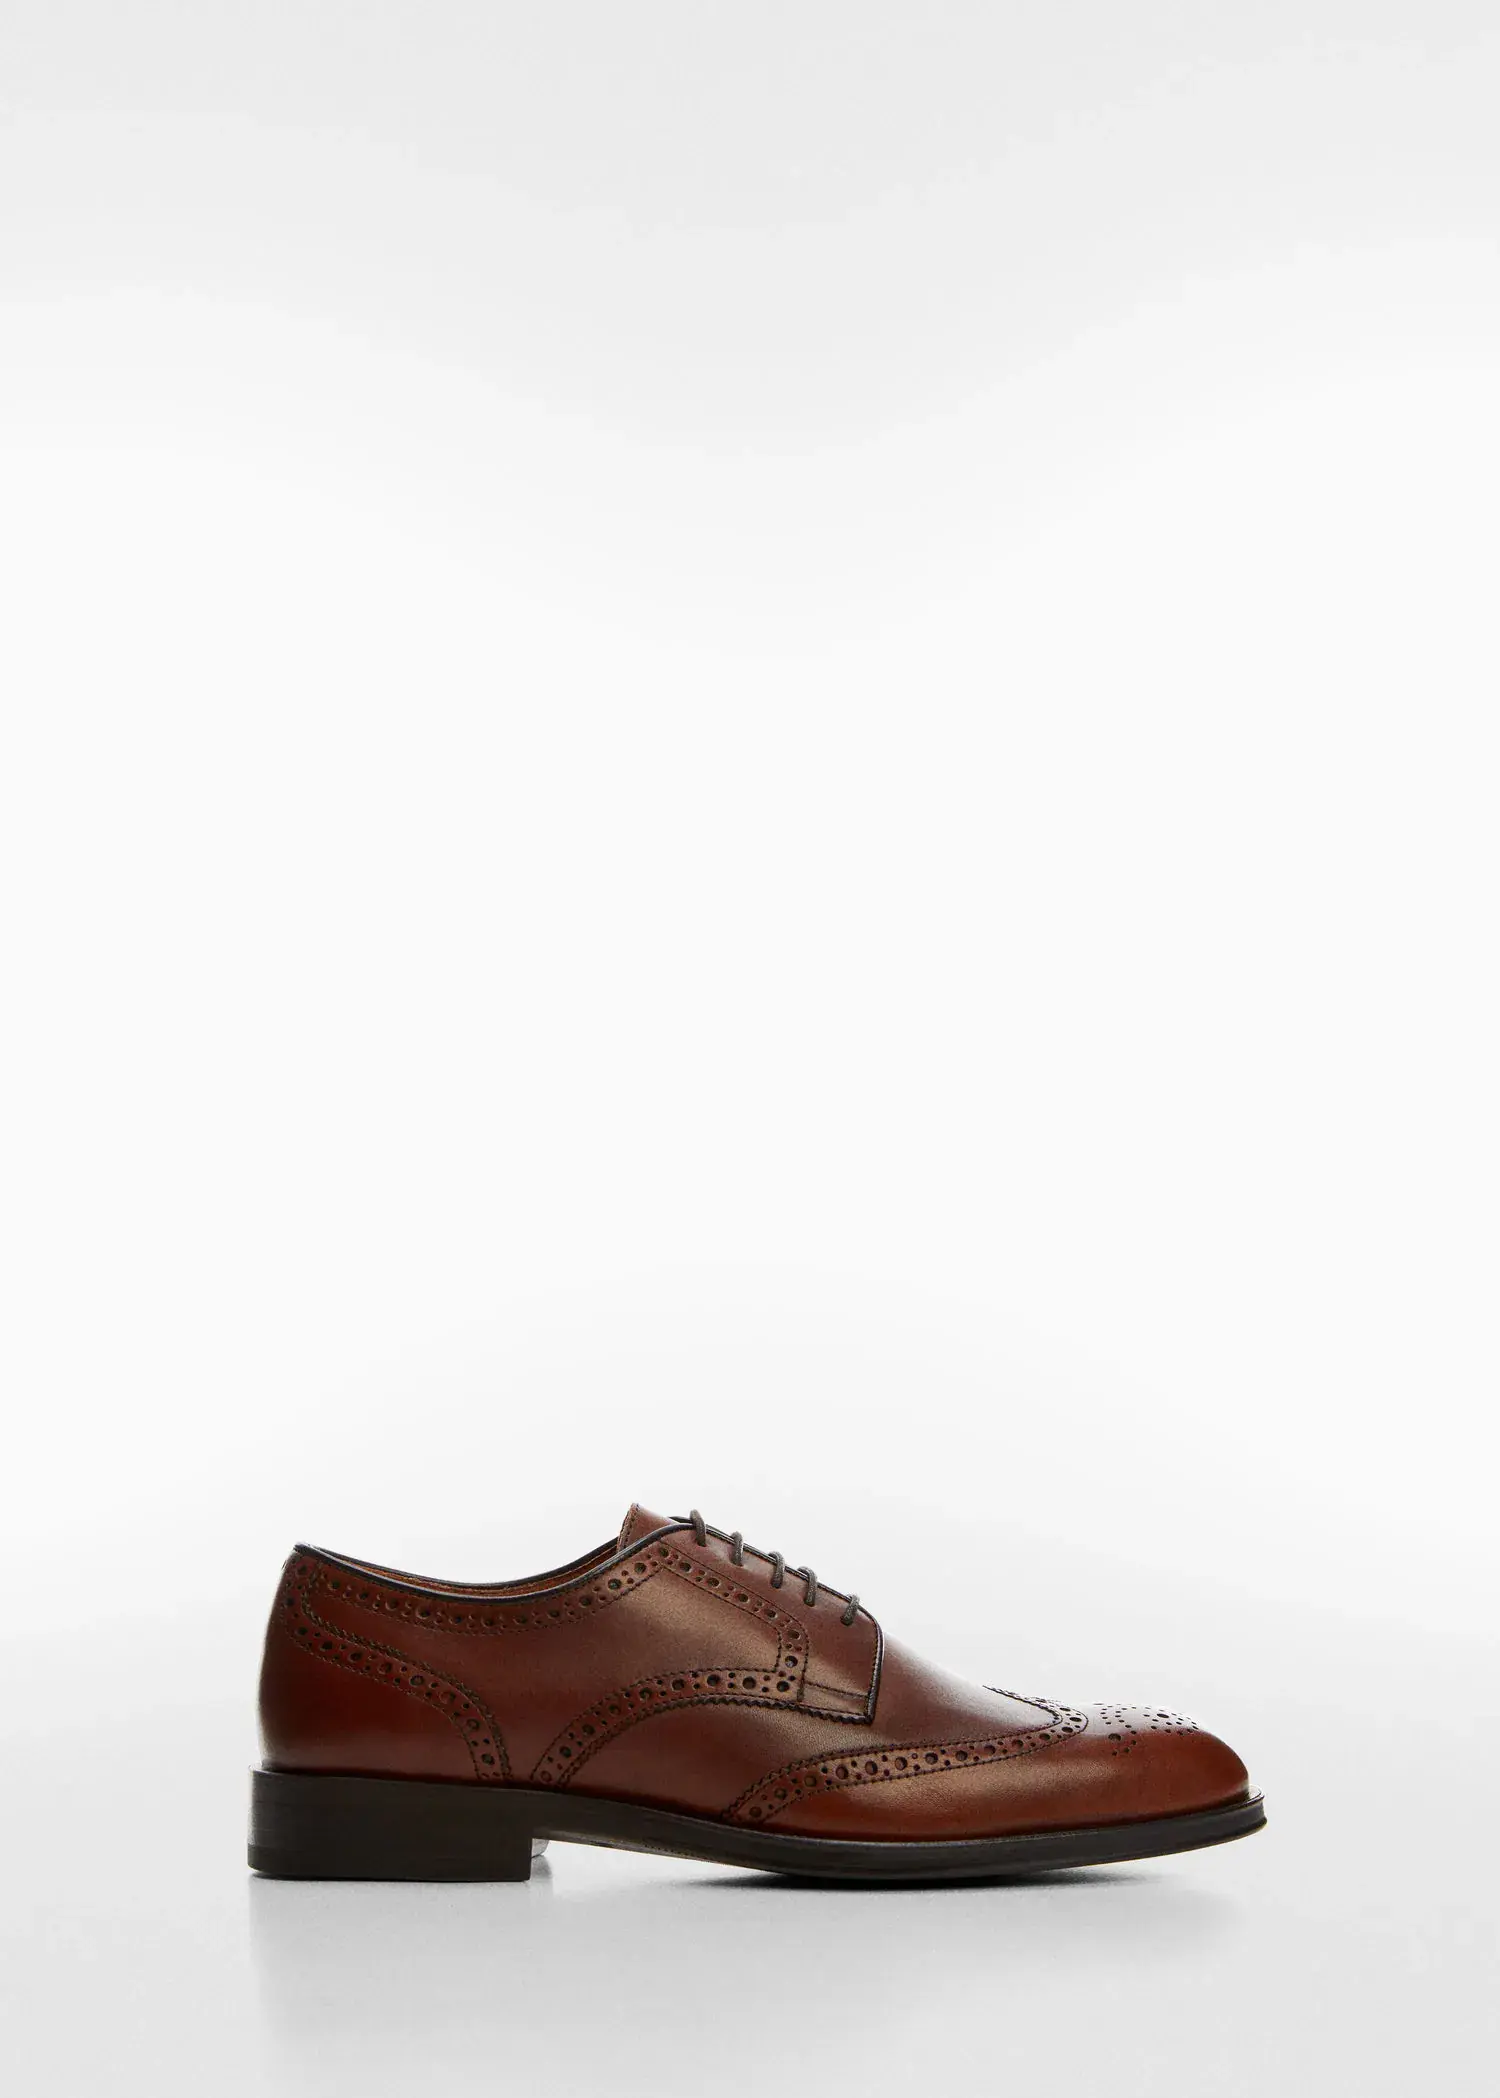 Mango Die-cut leather dress shoes. a pair of brown shoes on a white background. 